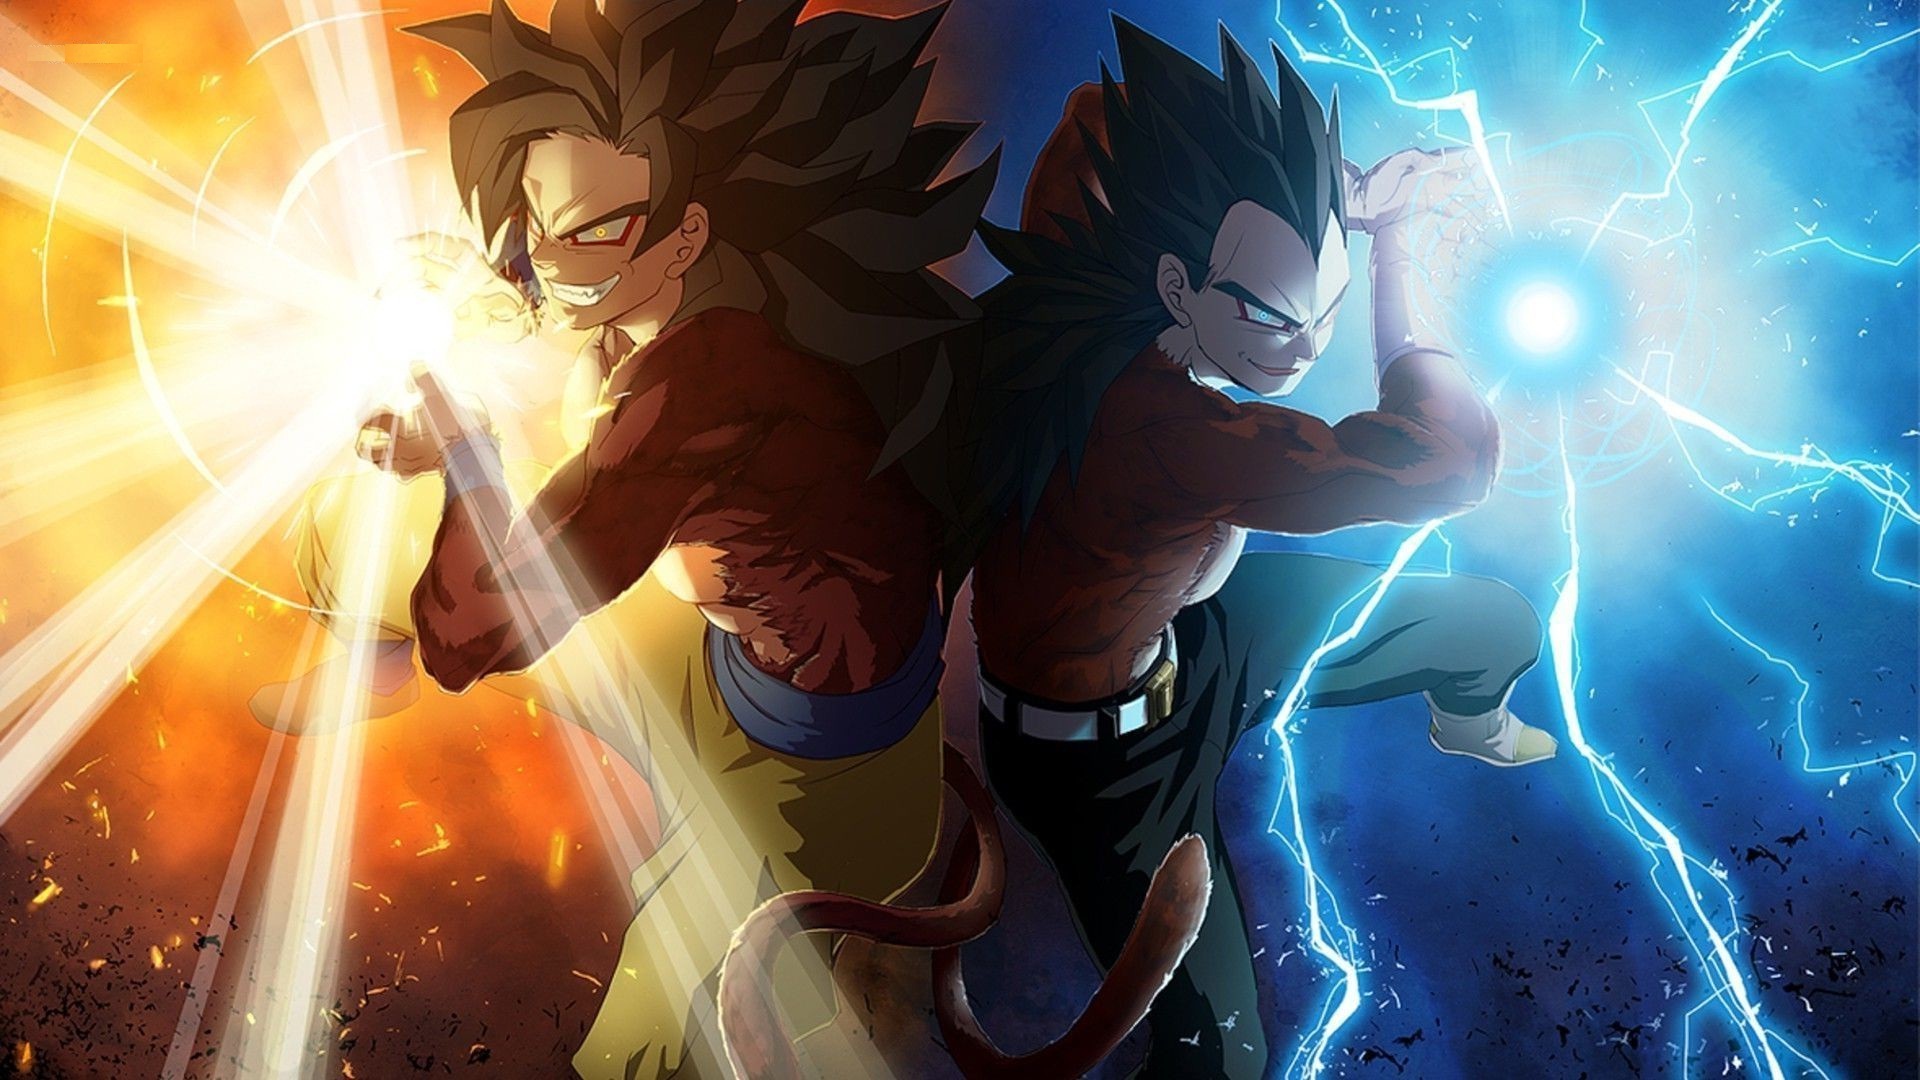 Goku SSJ4 Desktop Backgrounds with image resolution 1920x1080 pixel. You can make this wallpaper for your Desktop Computer Backgrounds, Mac Wallpapers, Android Lock screen or iPhone Screensavers